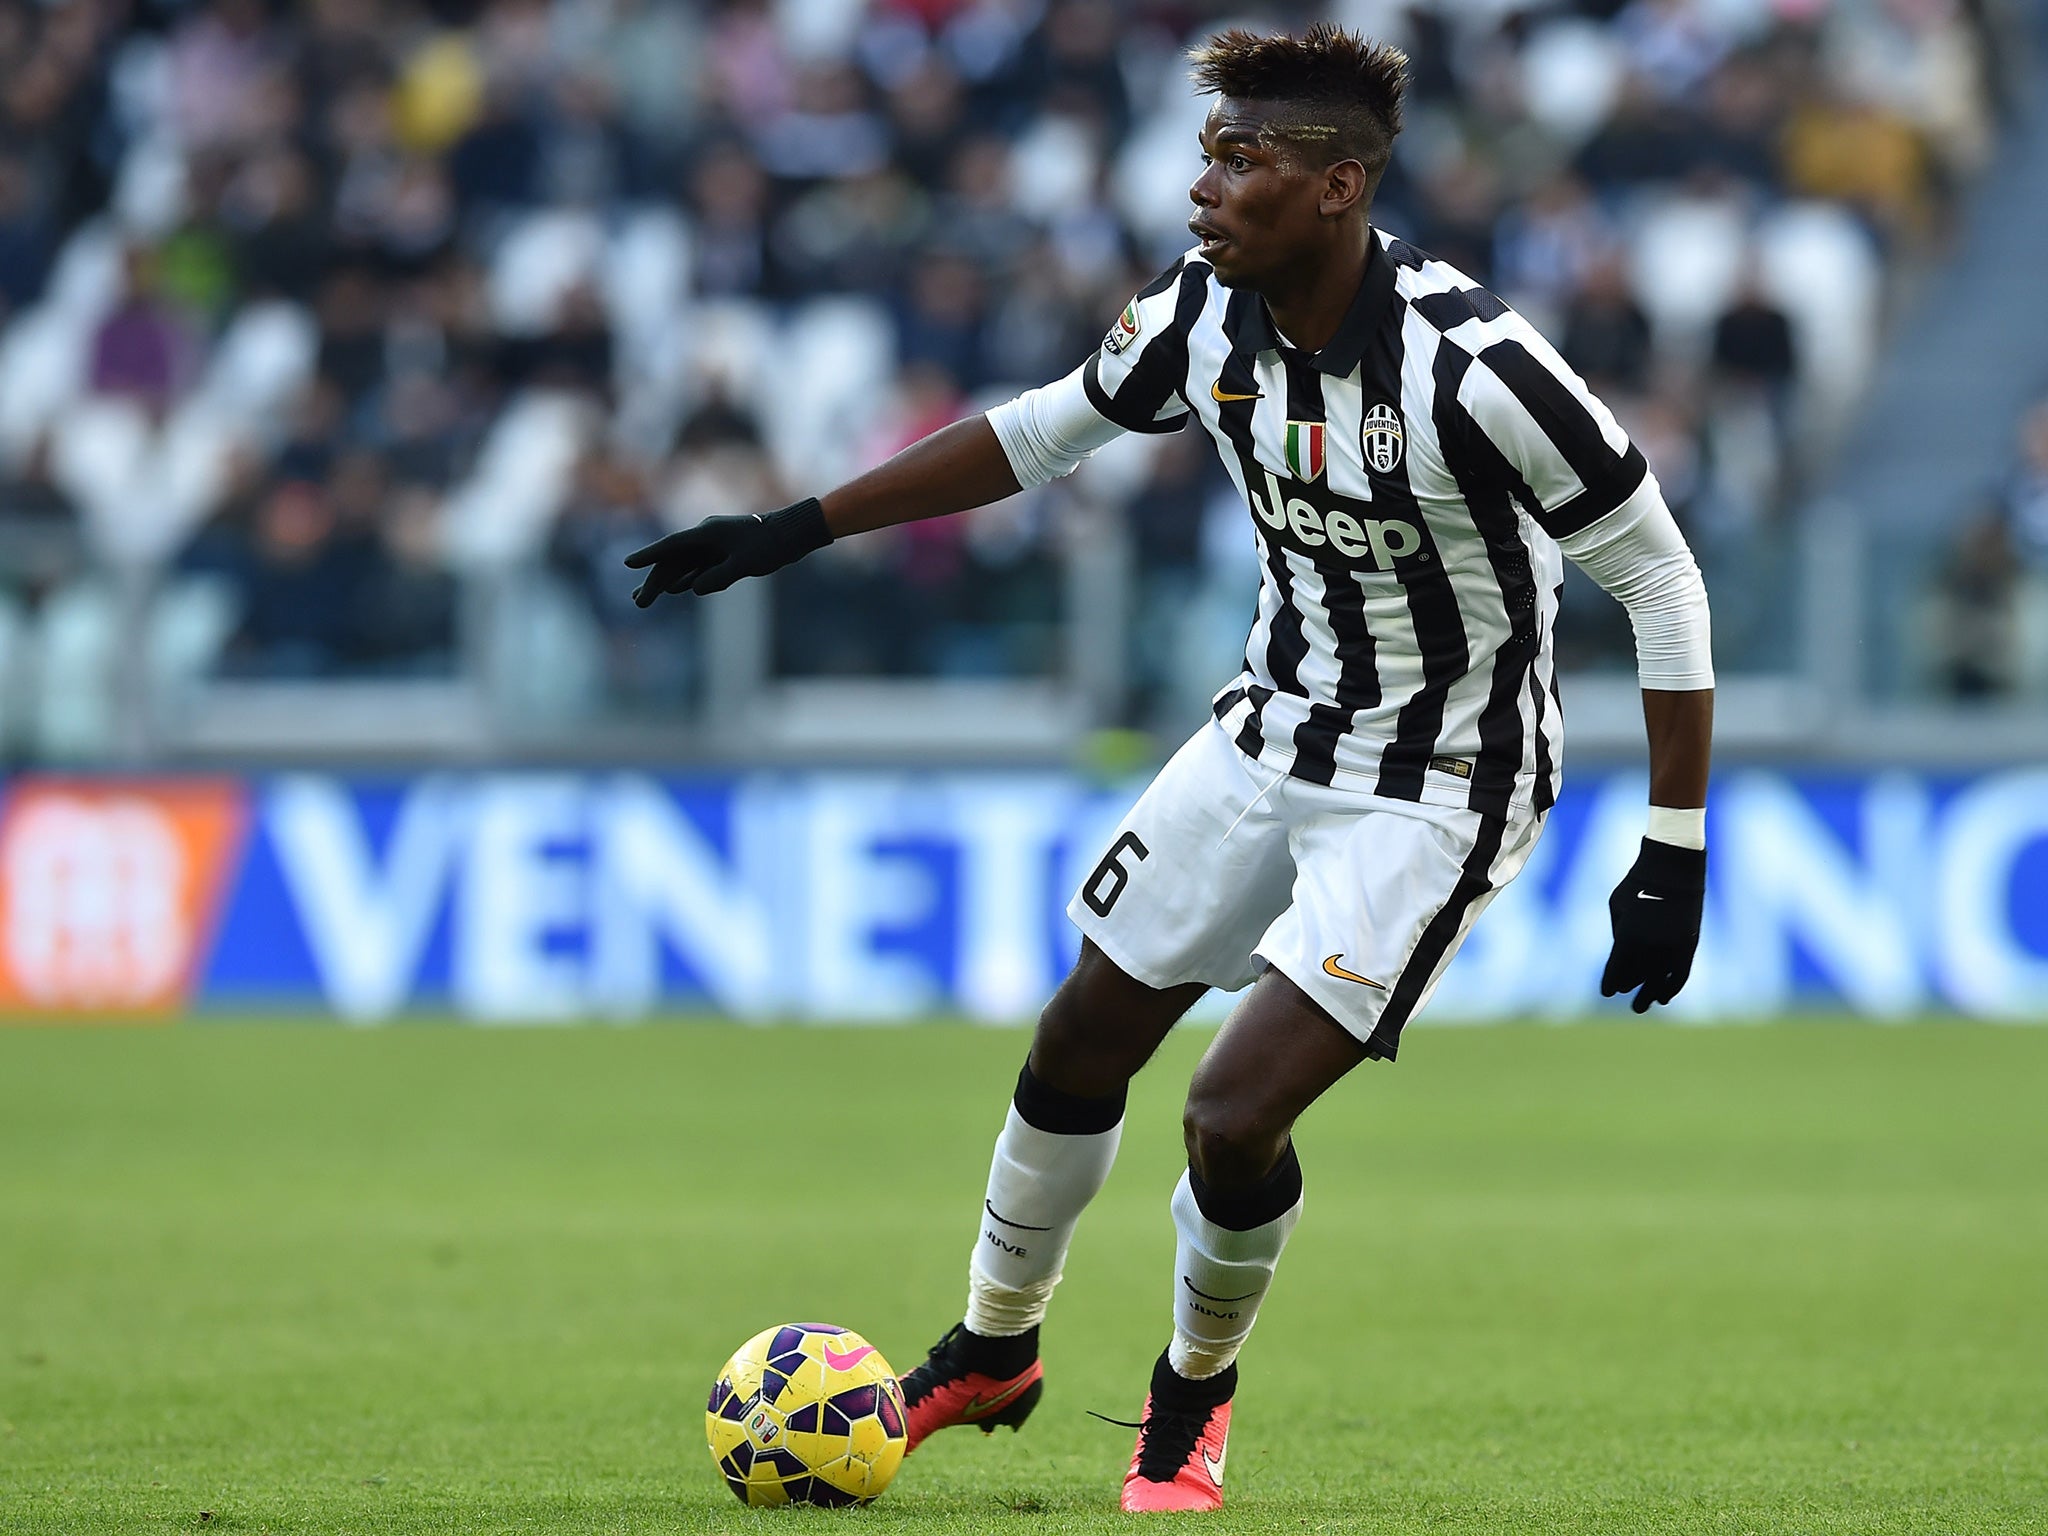 Barcelona are the latest club to join the race for Paul Pogba's signature